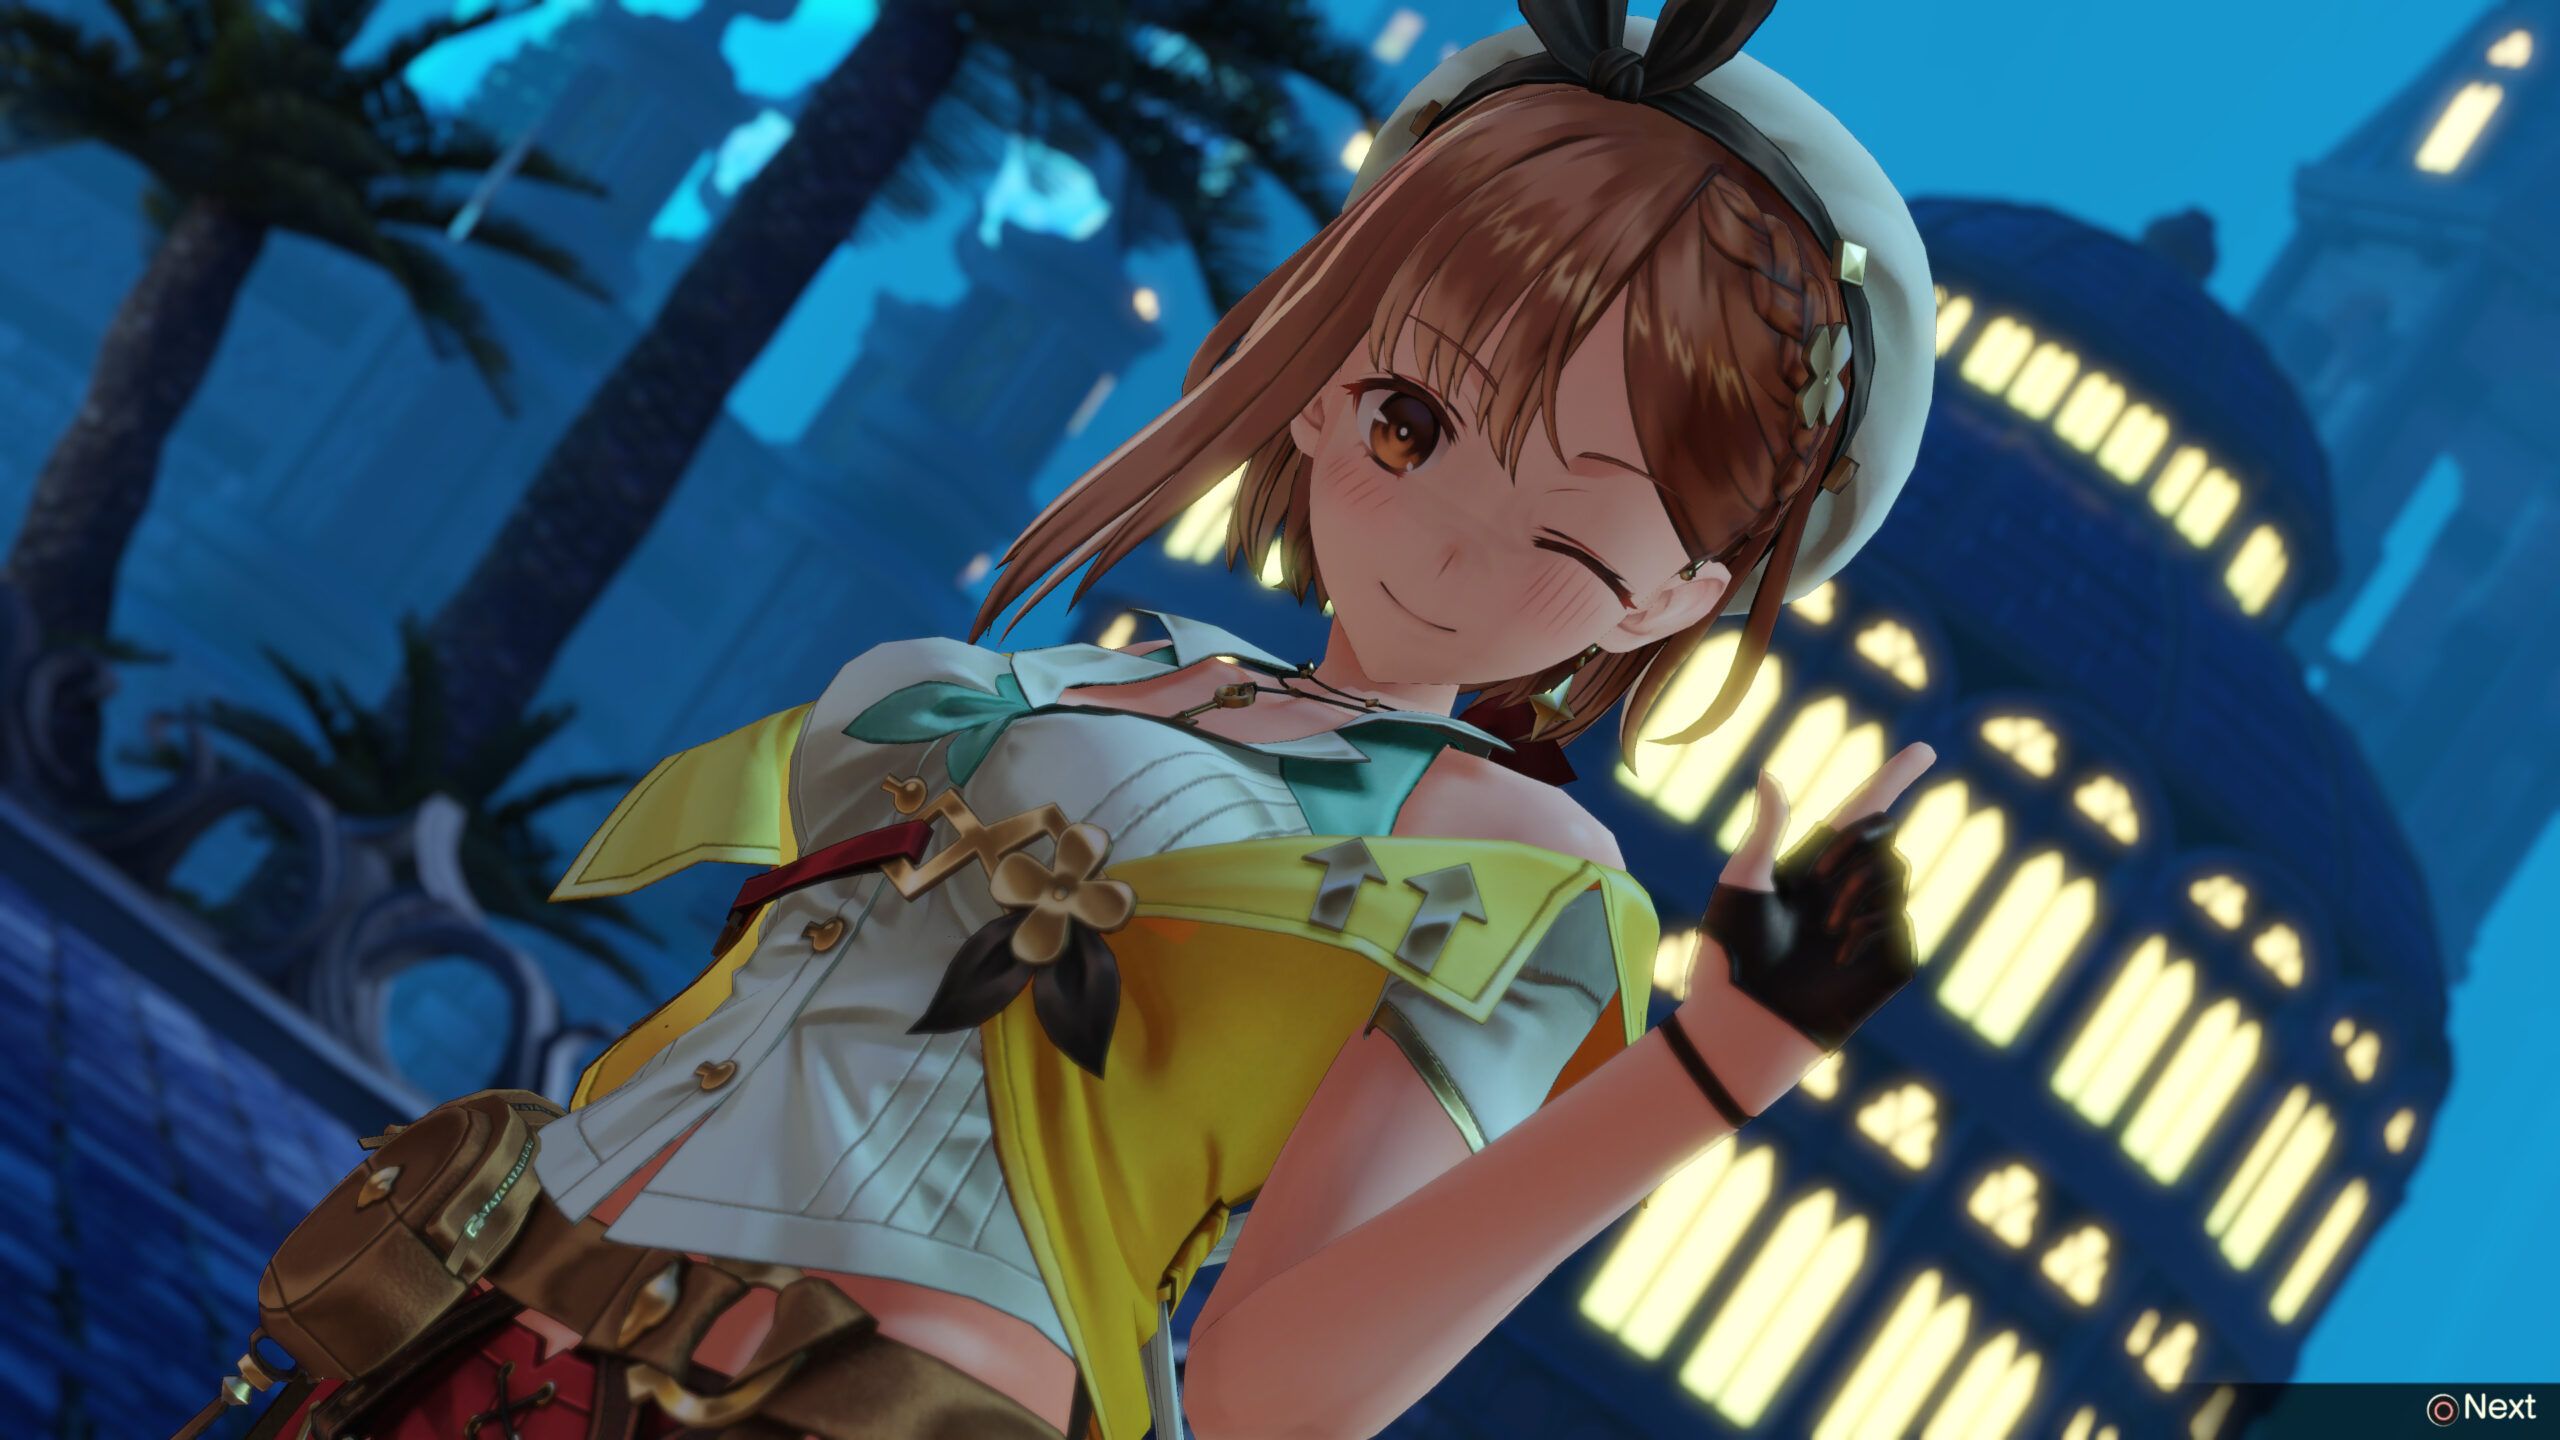 Atelier Ryza 2: Lost Legends & the Secret Fairy releases on January 26th in the west